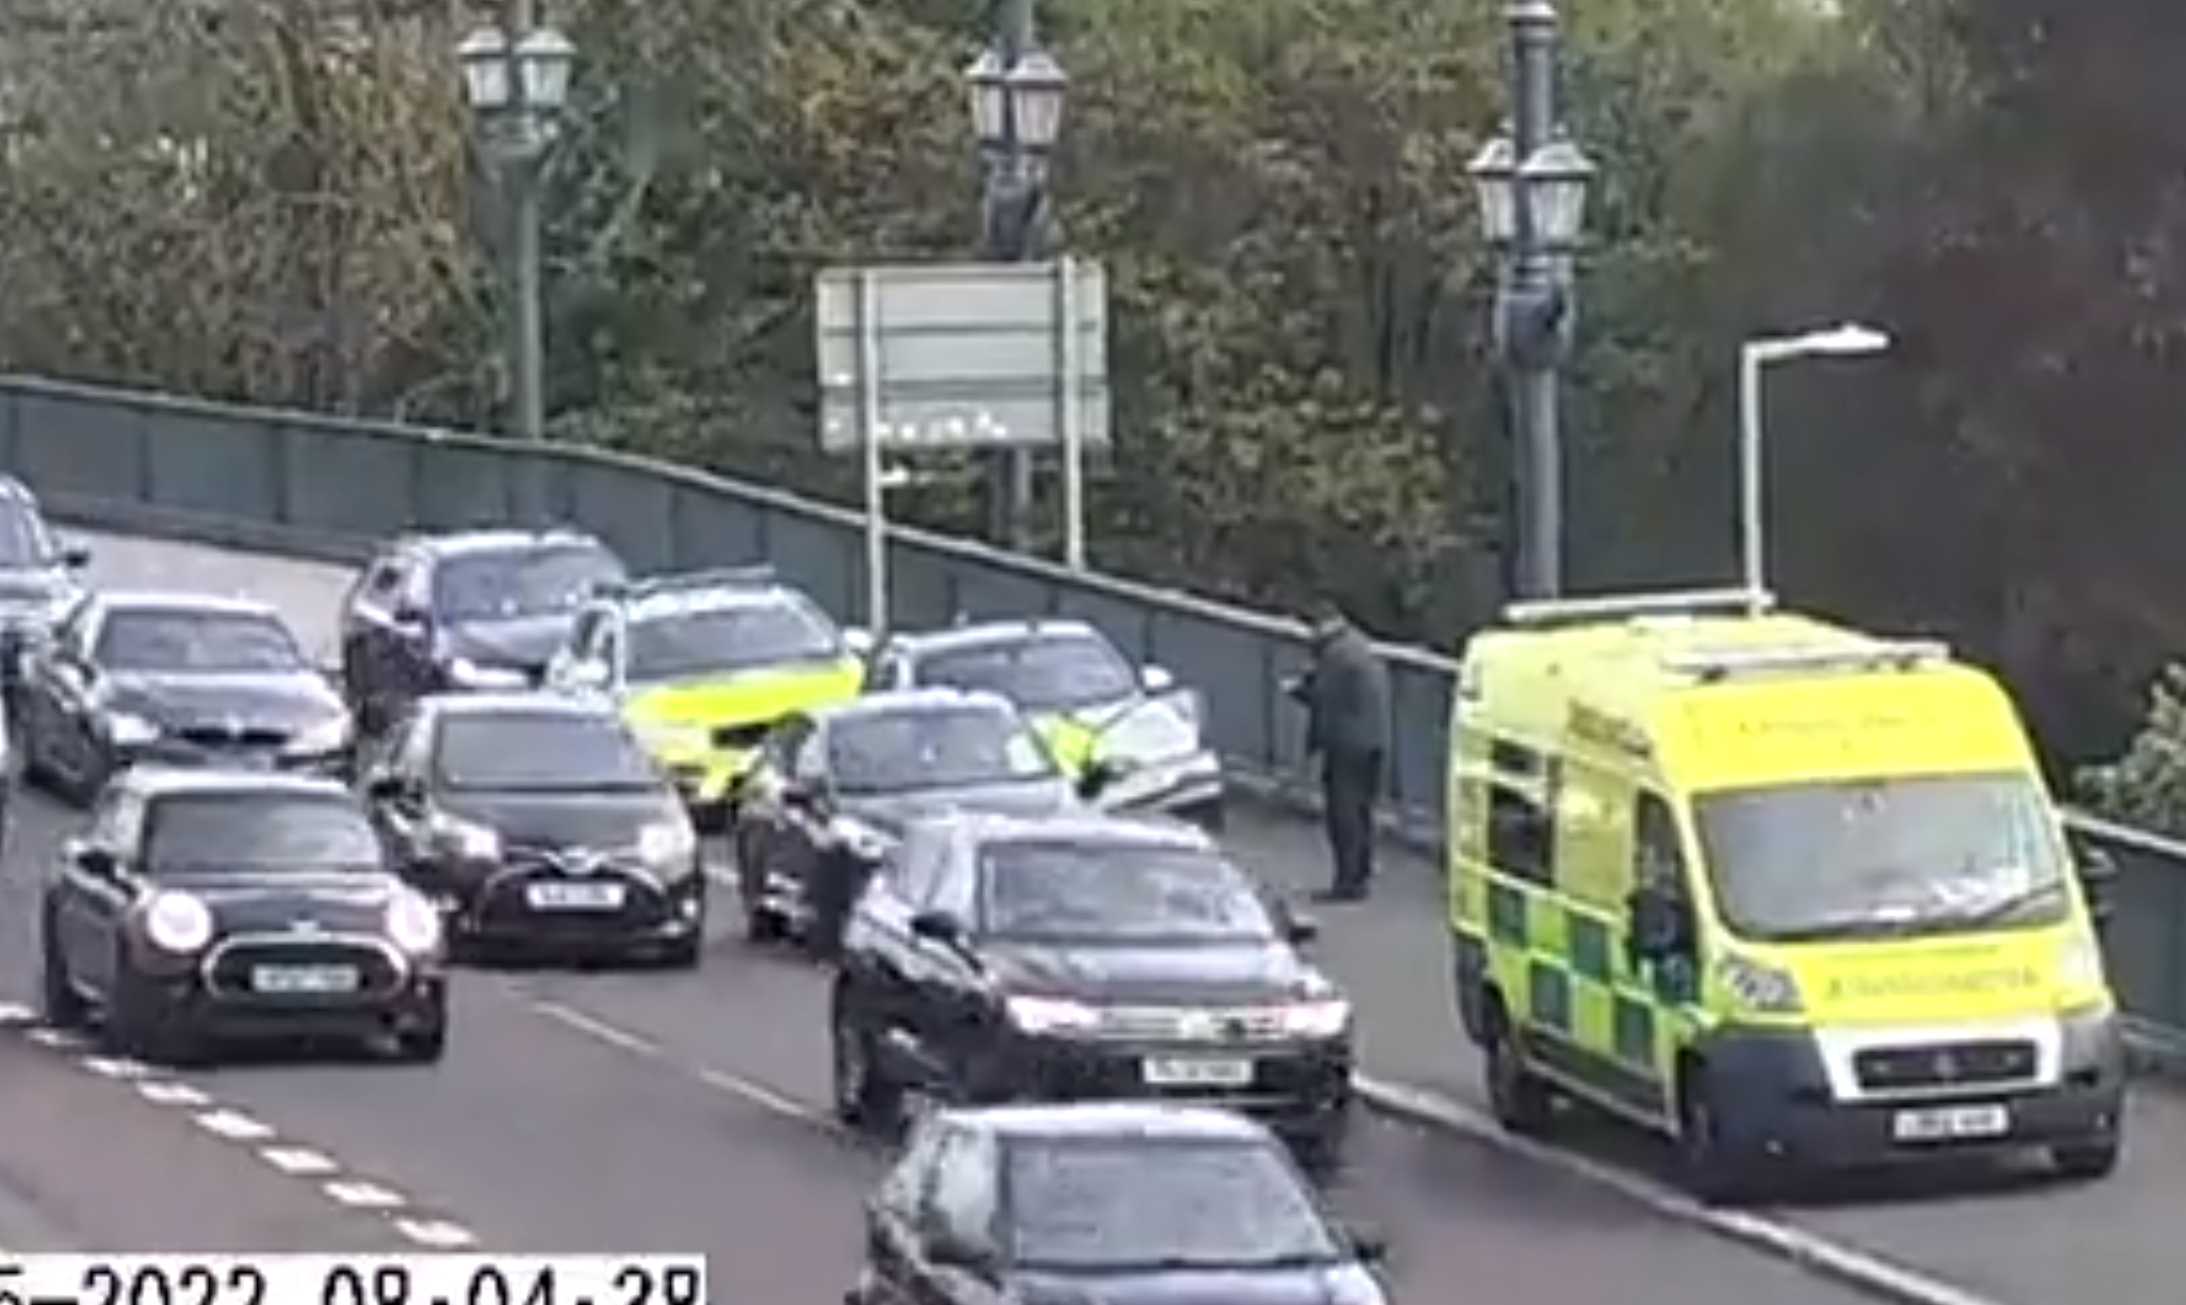 Emergency services deal with crash on A167 on Tyne Bridge - live updates